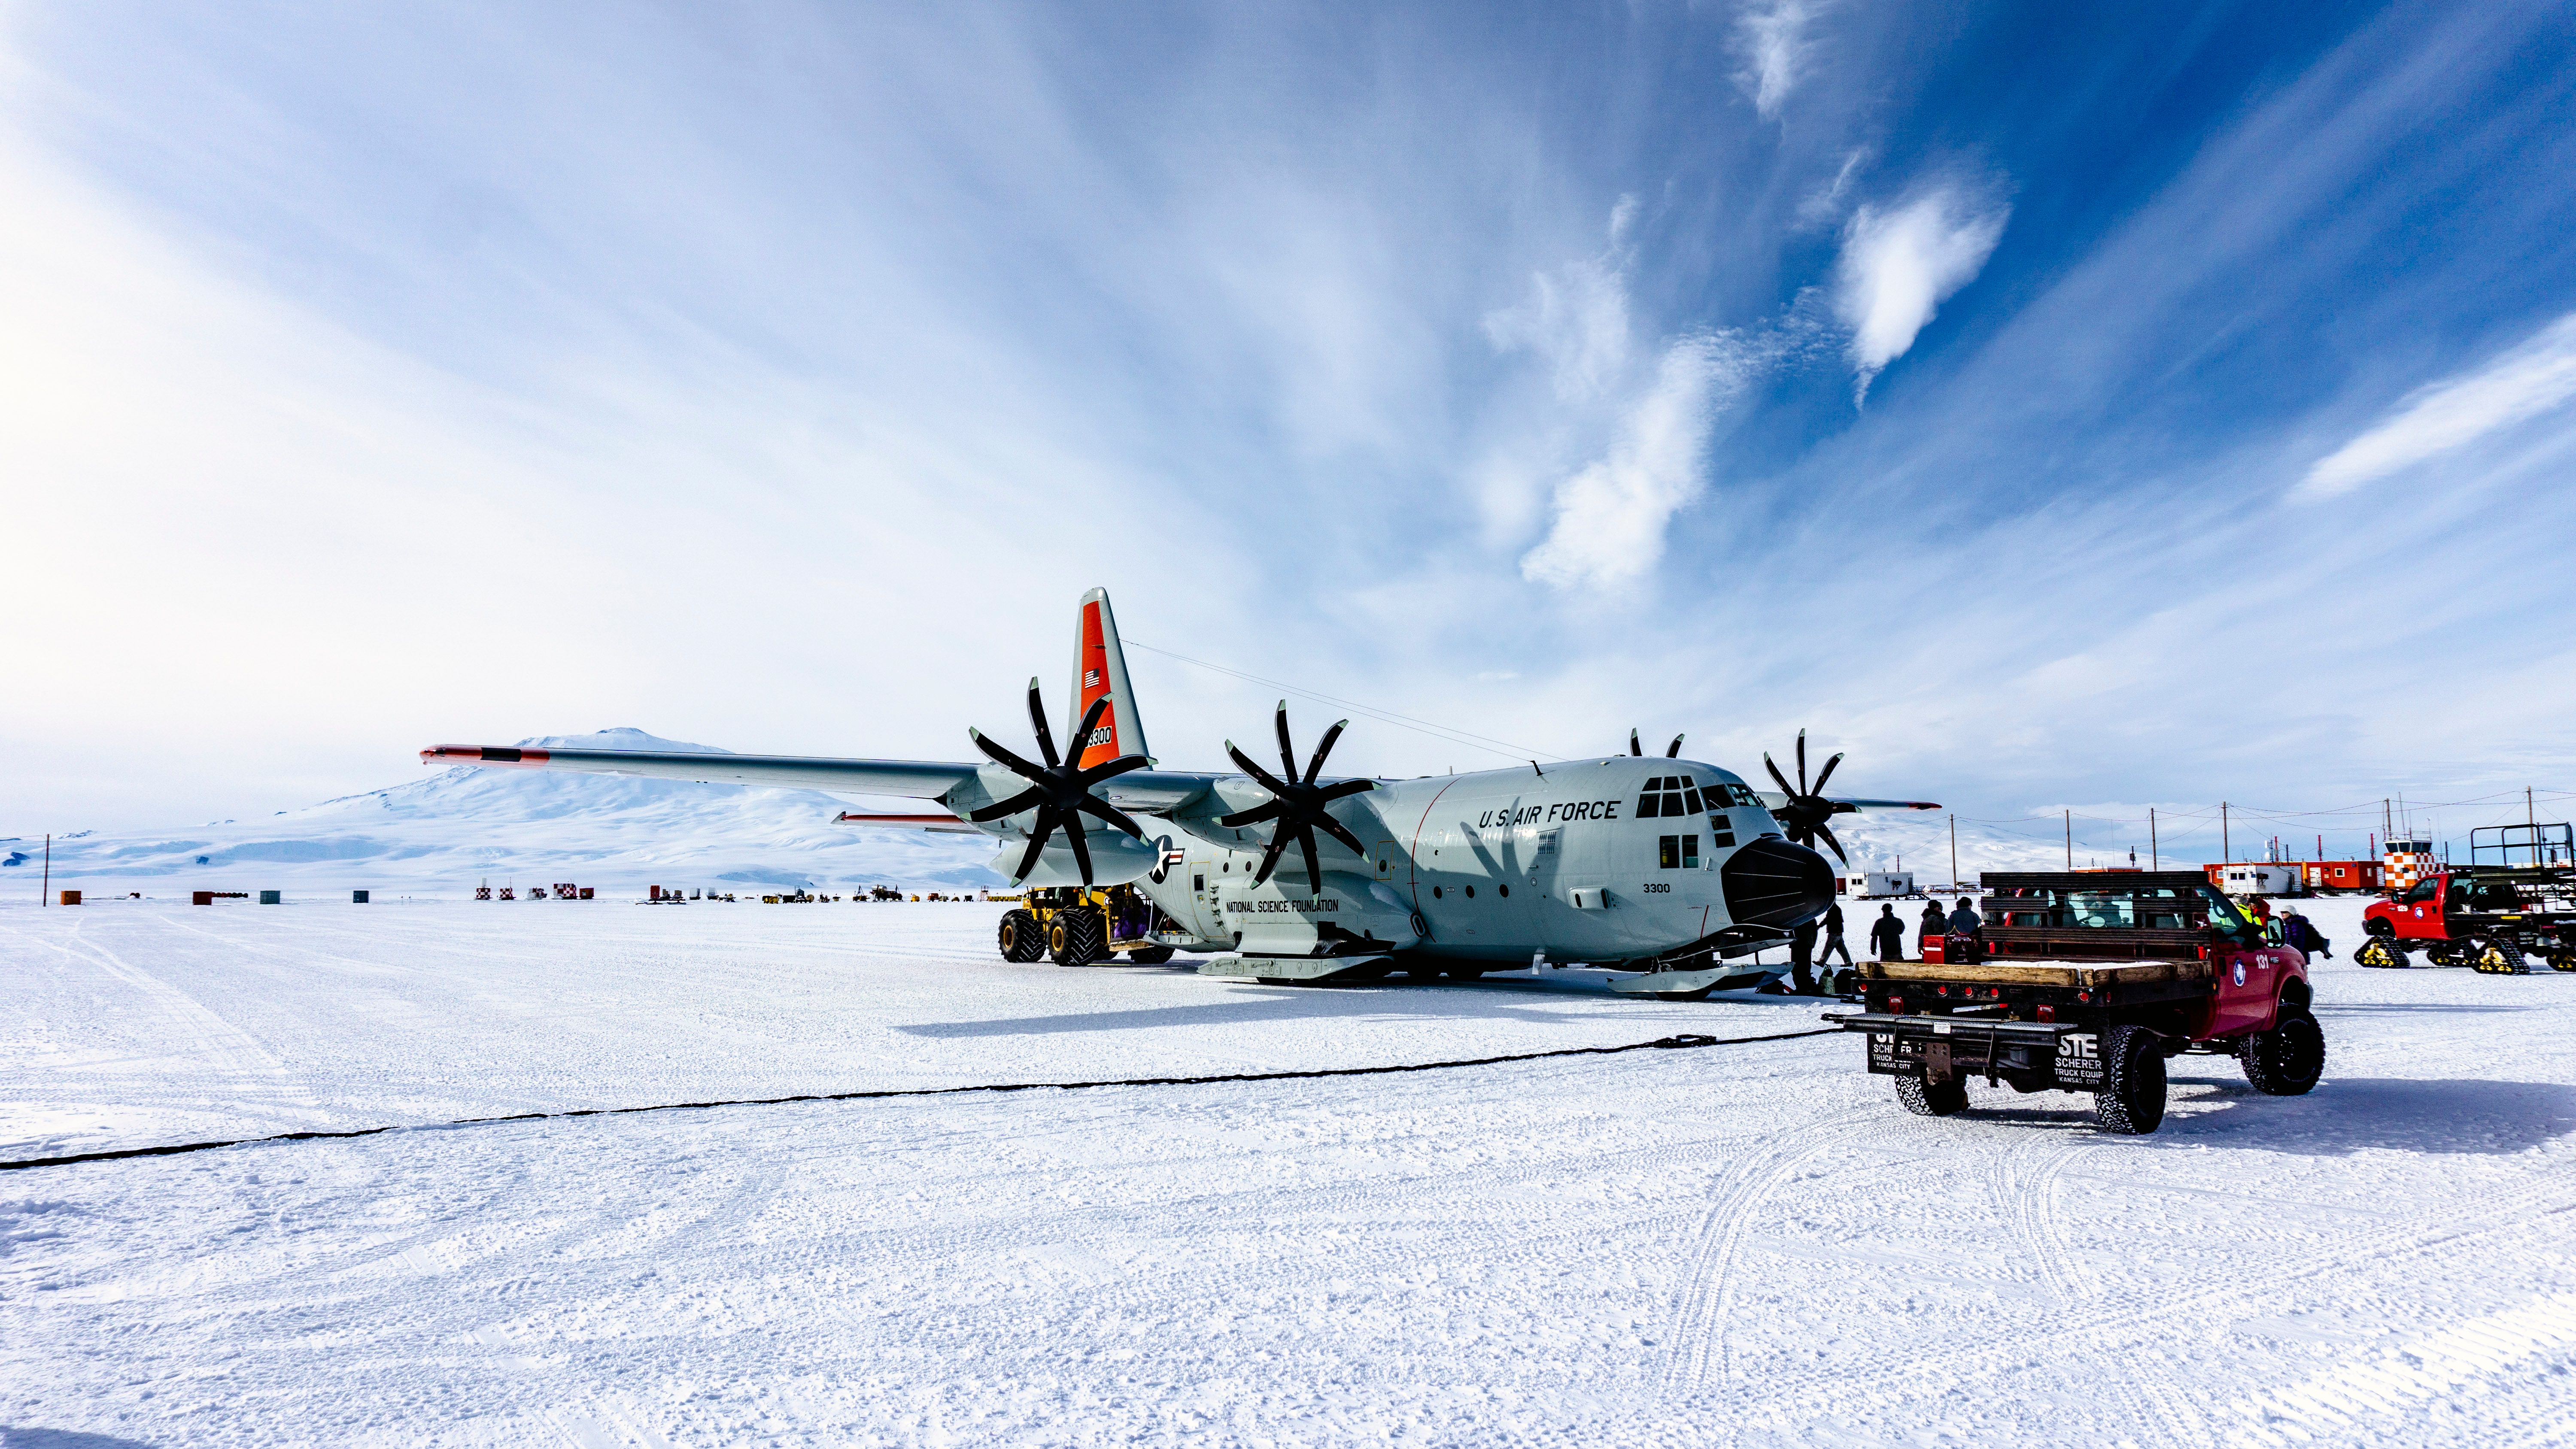 A U.S Airforce LC-130 parked at Williams airfield near Mcmurdo station in Antarctica.